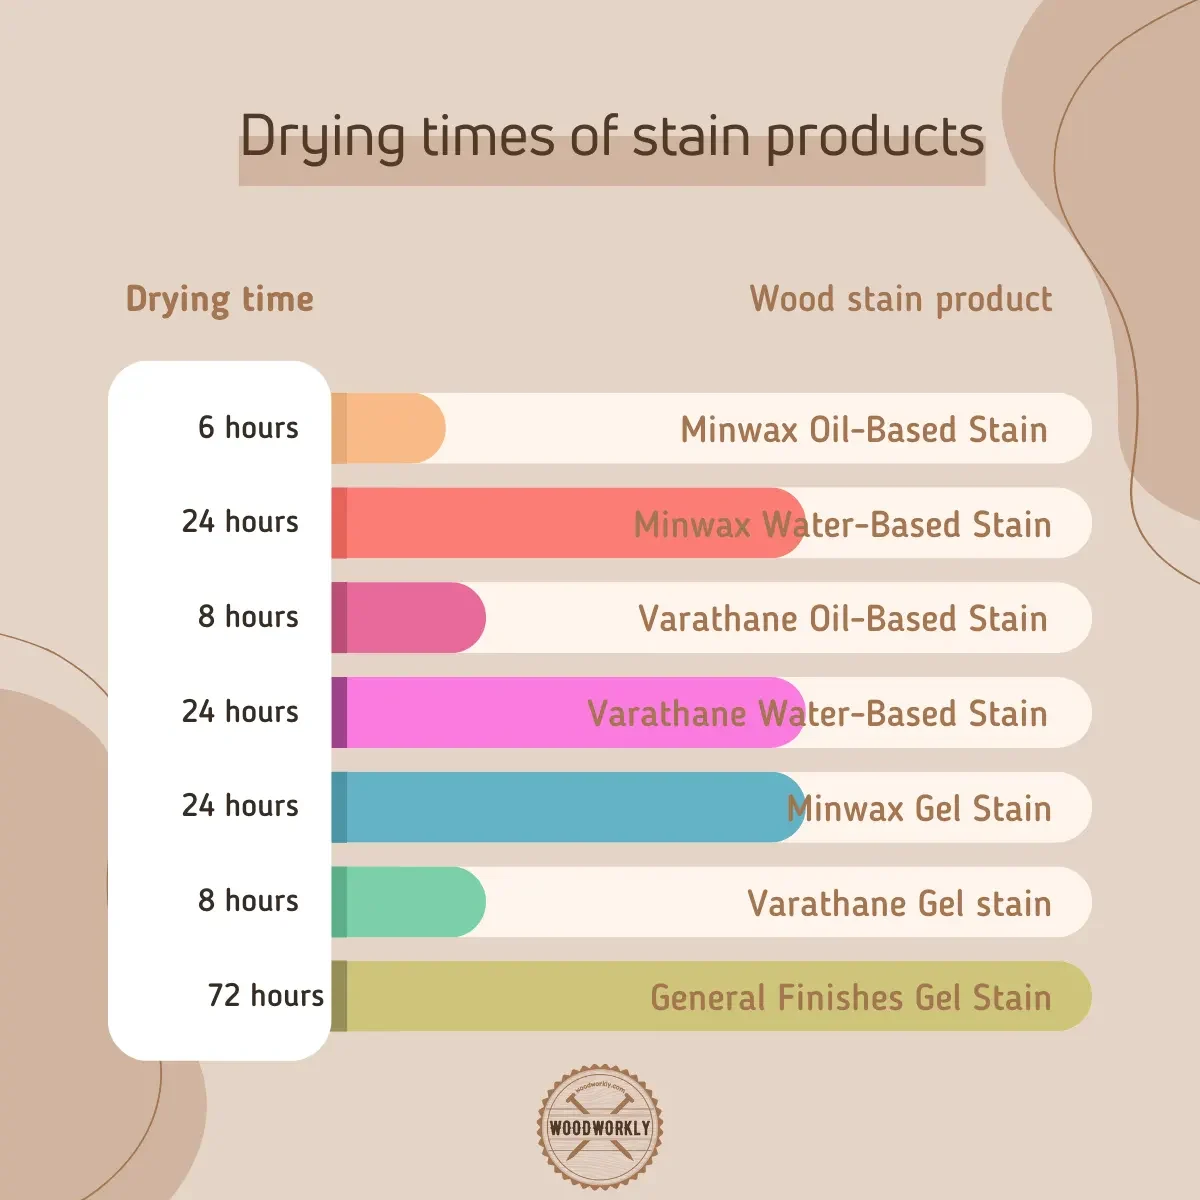 drying times of wood stain products before apply spar urethane